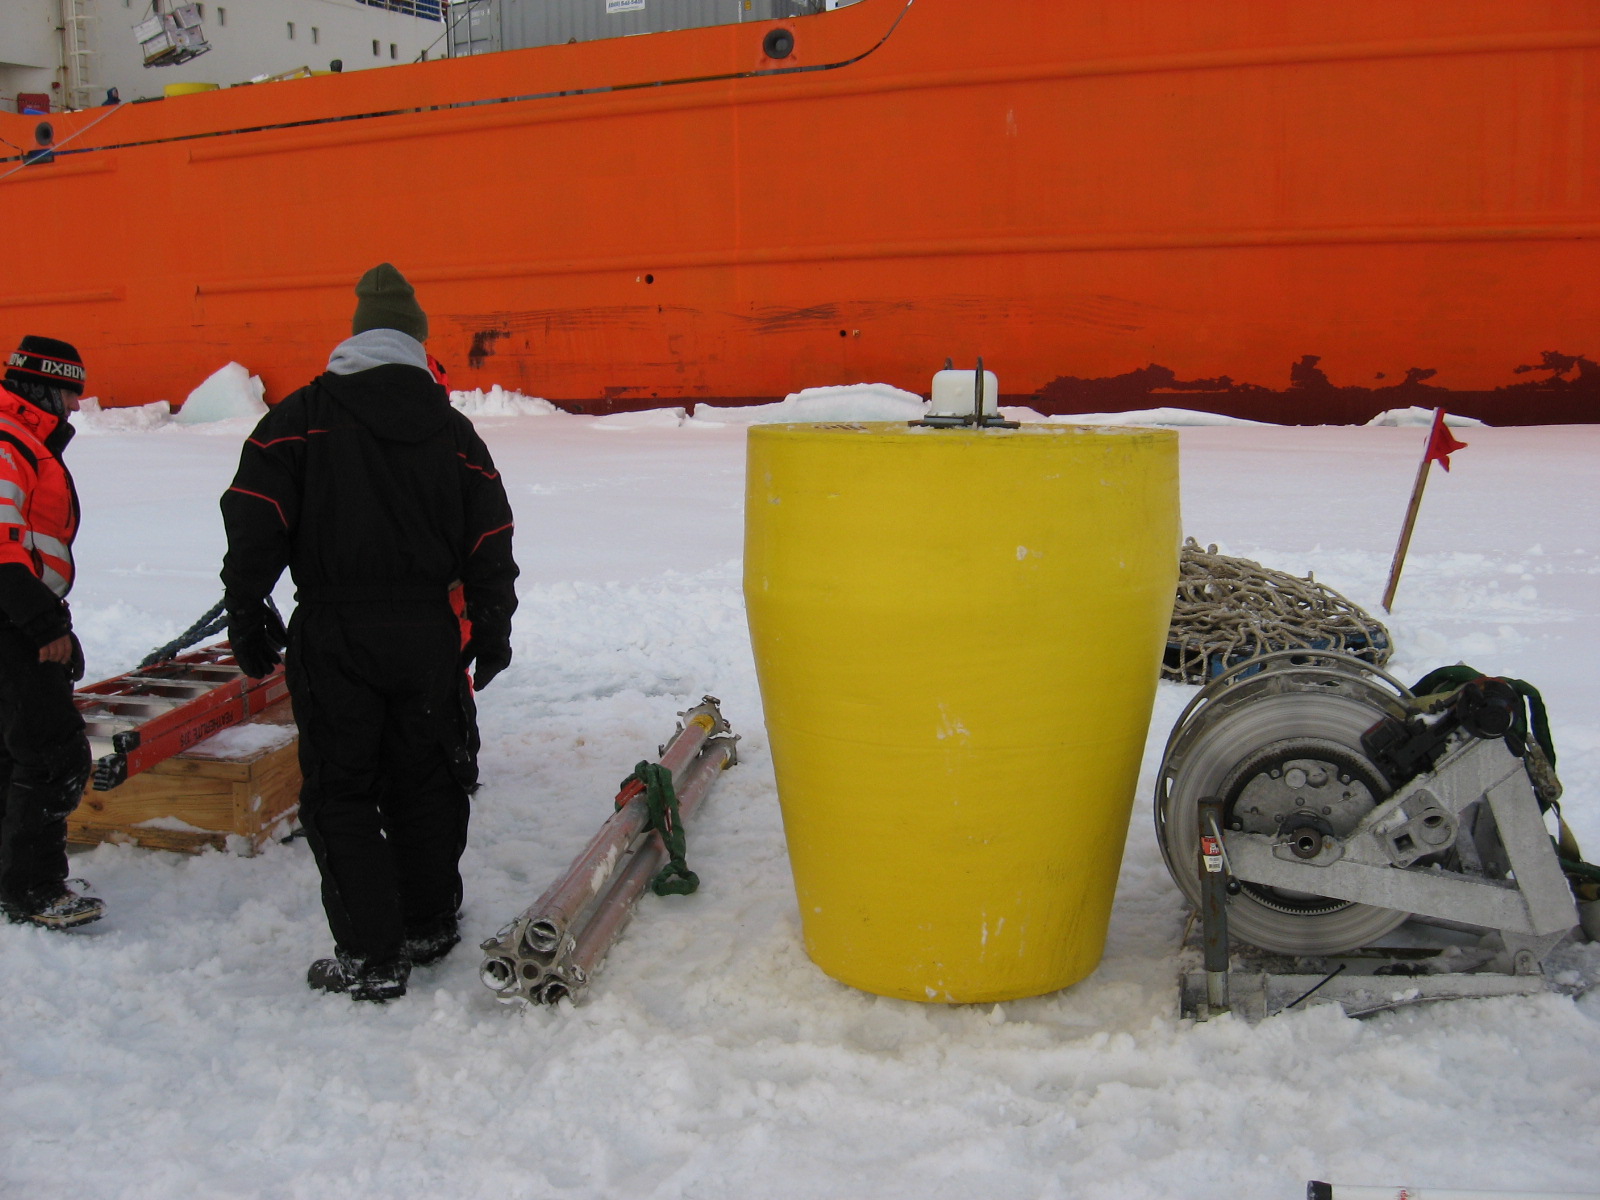 ITP 91 surface buoy deployed and deployment apparatus disassembled for return to the ship.  (Photo by Frank Bahr)